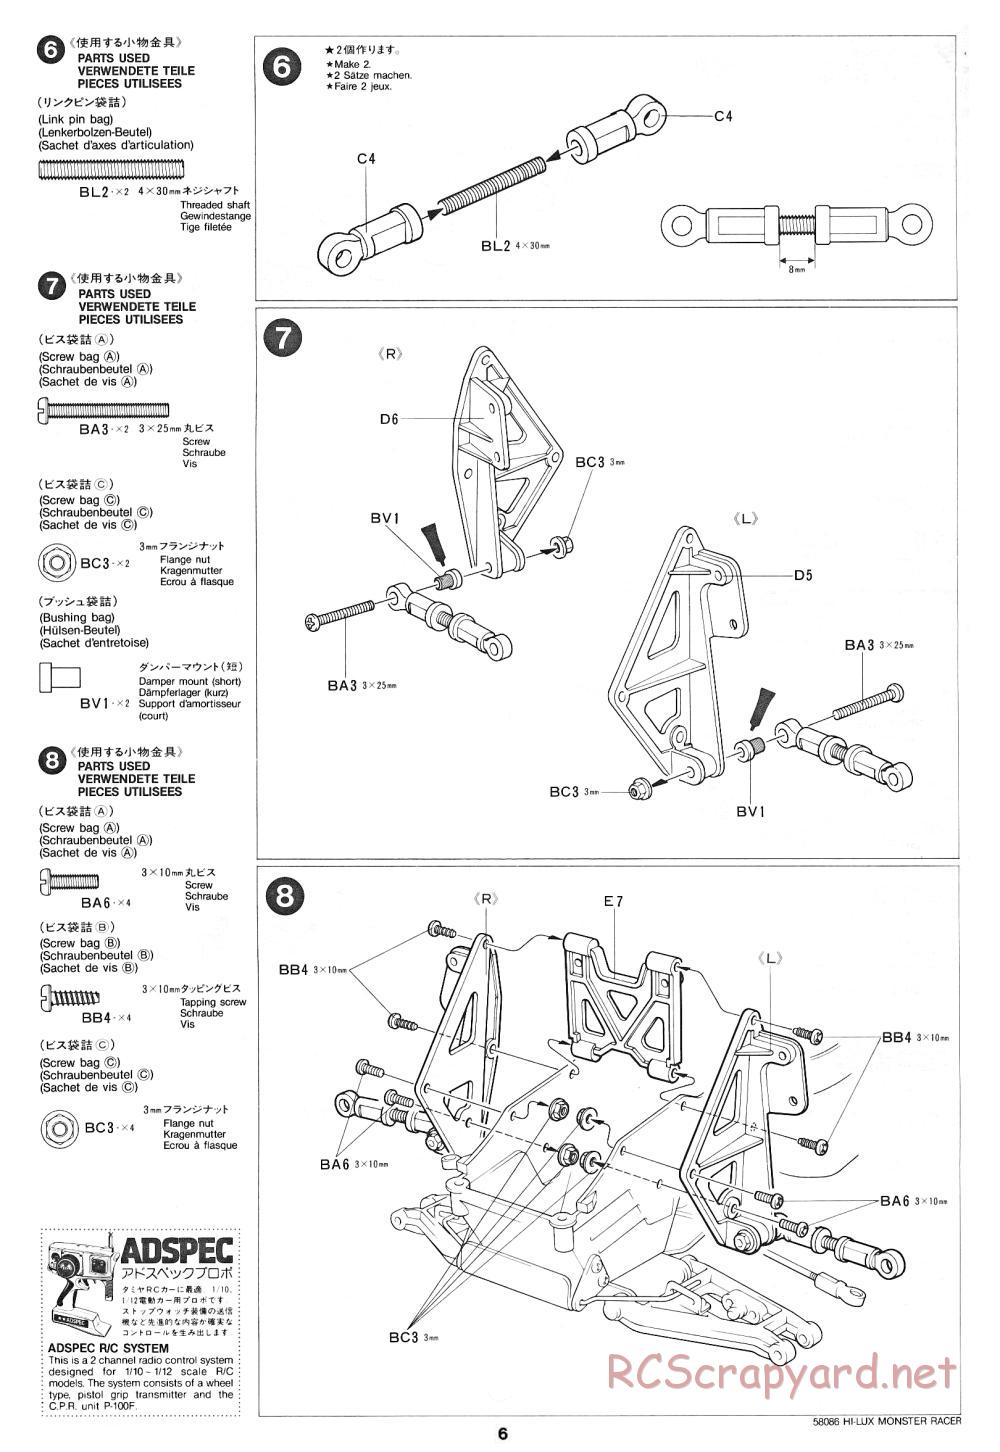 Tamiya - Toyota Hilux Monster Racer - 58086 - Manual - Page 6